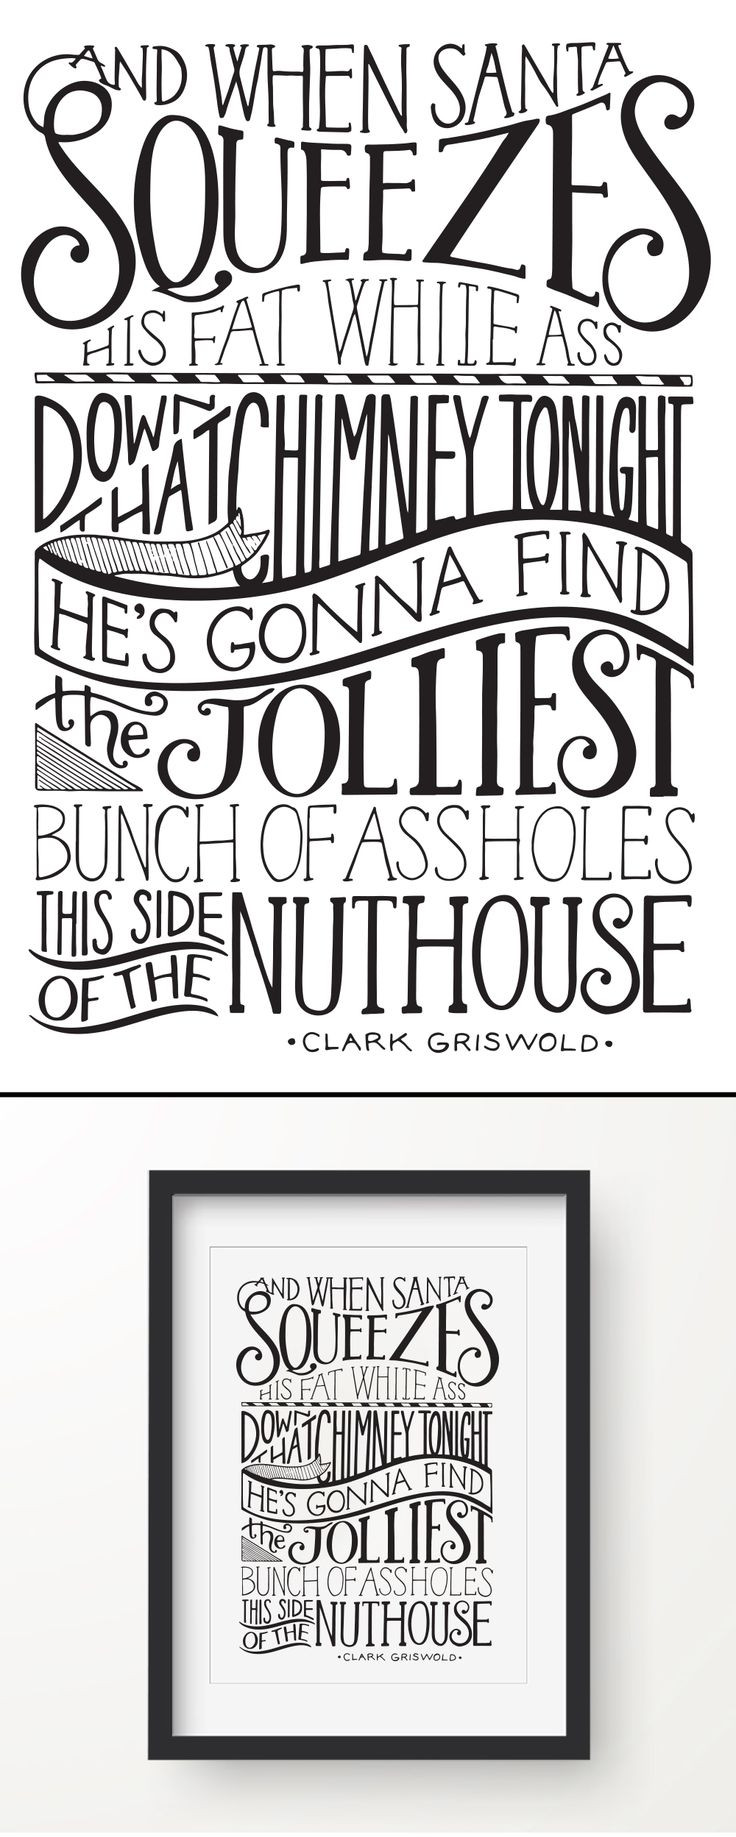 Griswold Christmas Quotes
 Best 25 Griswold christmas ideas on Pinterest